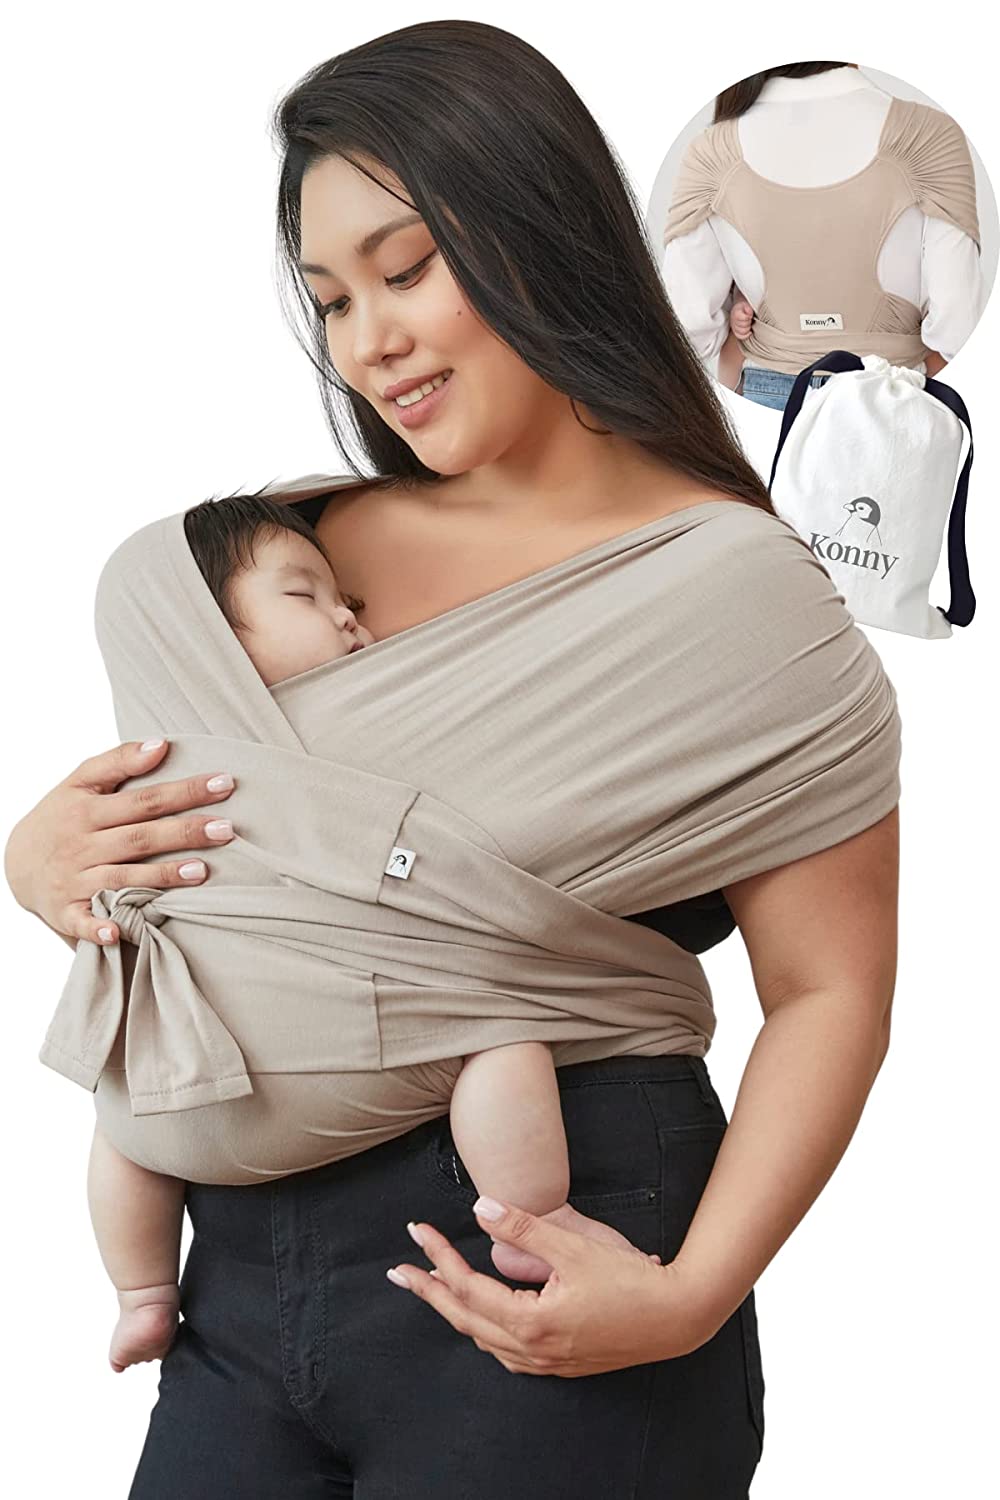 Konny Baby Carrier | Ultra-Lightweight, Easy Swaddle | Newborns, Infants up to 20 kg Toddlers | Soft and Breathable Fabric | Useful Sleep Solution (Beige, 2XL)